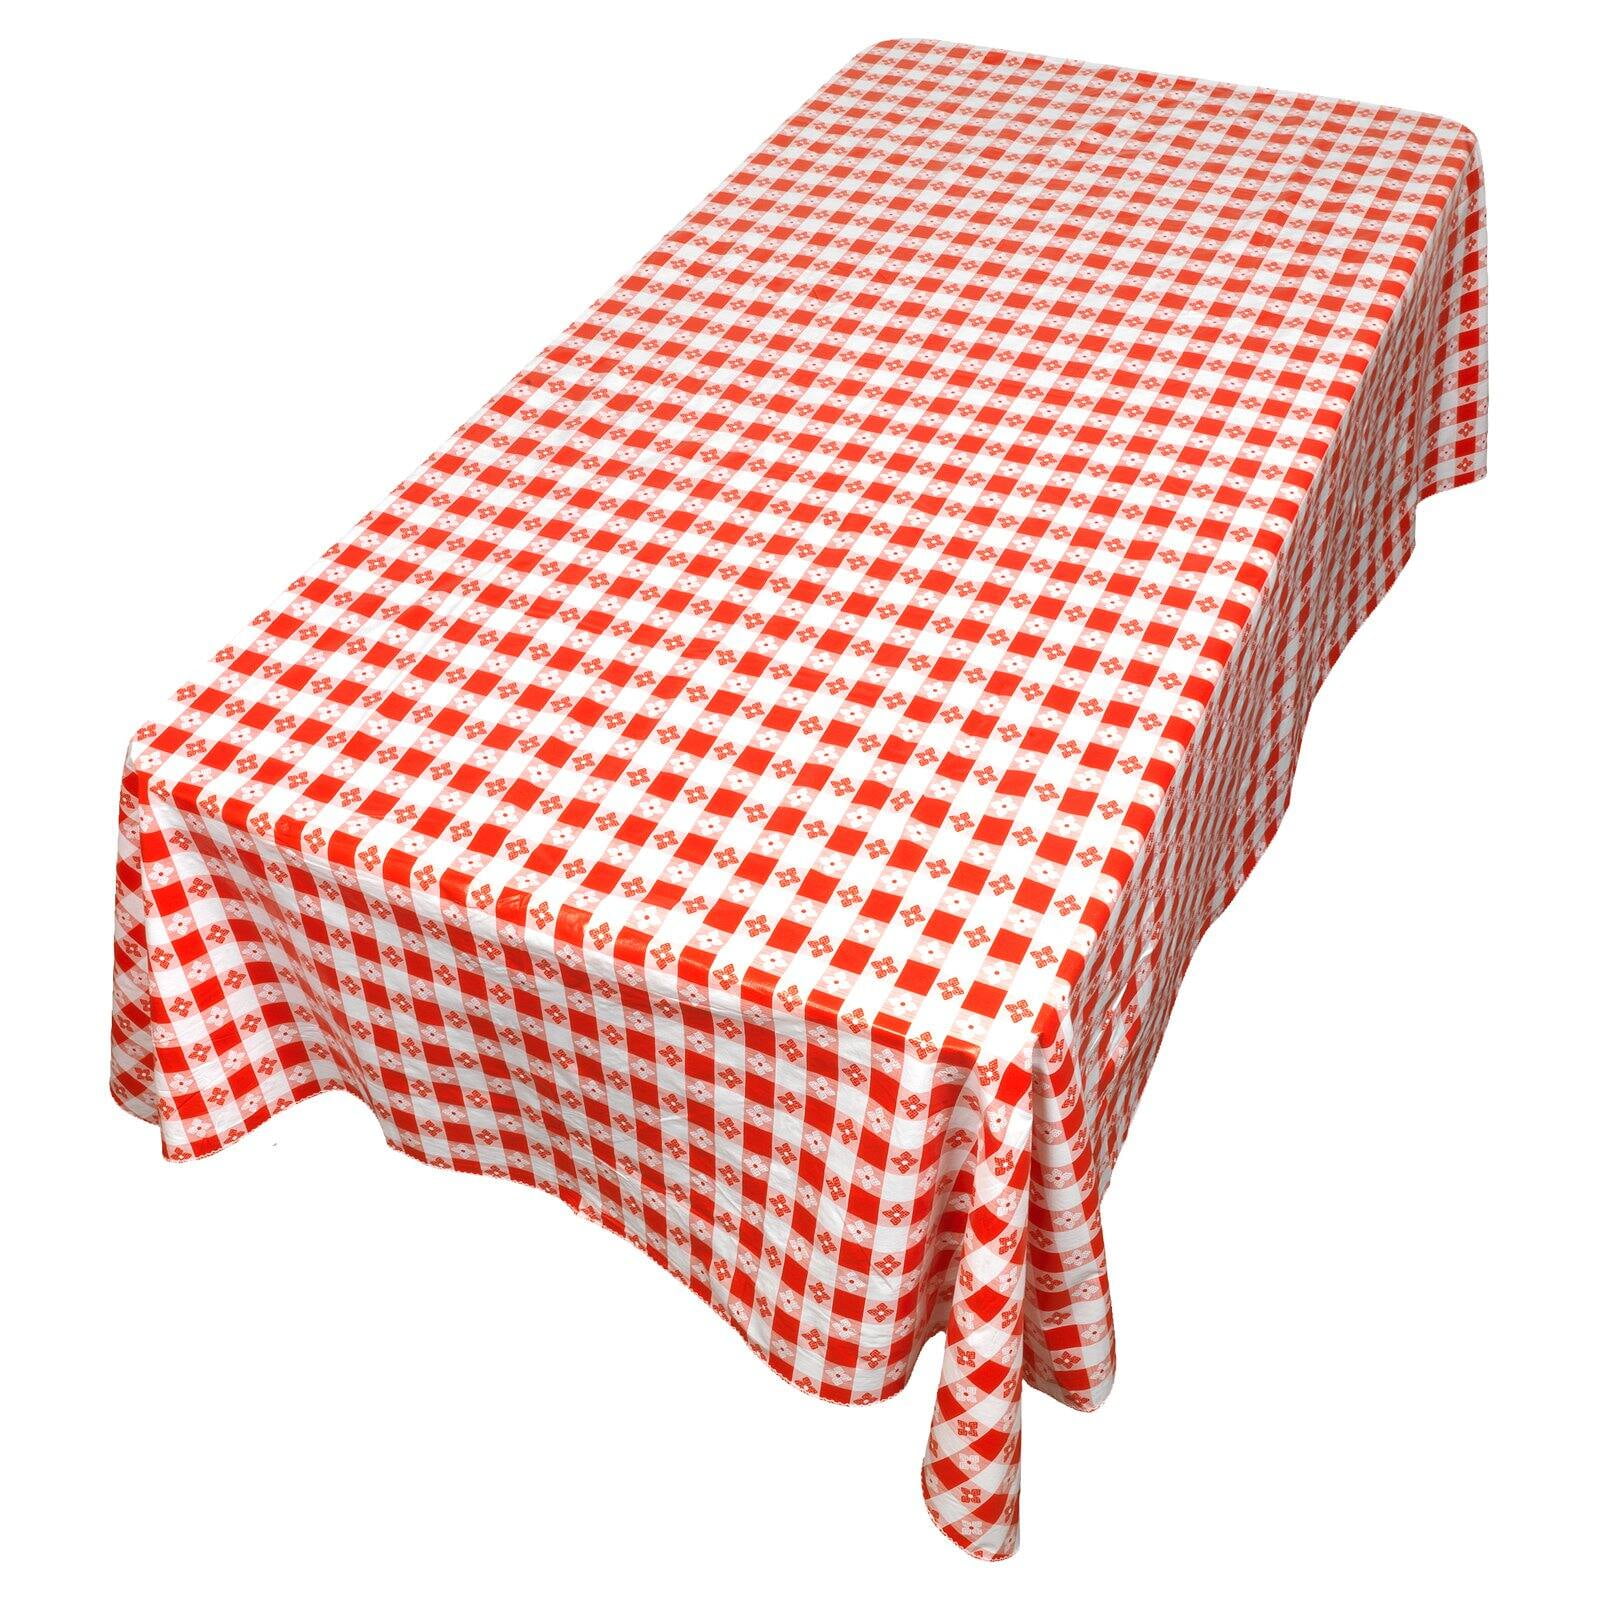 PICNIC TABLECLOTH COMBO PACK SEWN SEAMS EASY CLEAN WITH 6 SPRING CLAMPS 